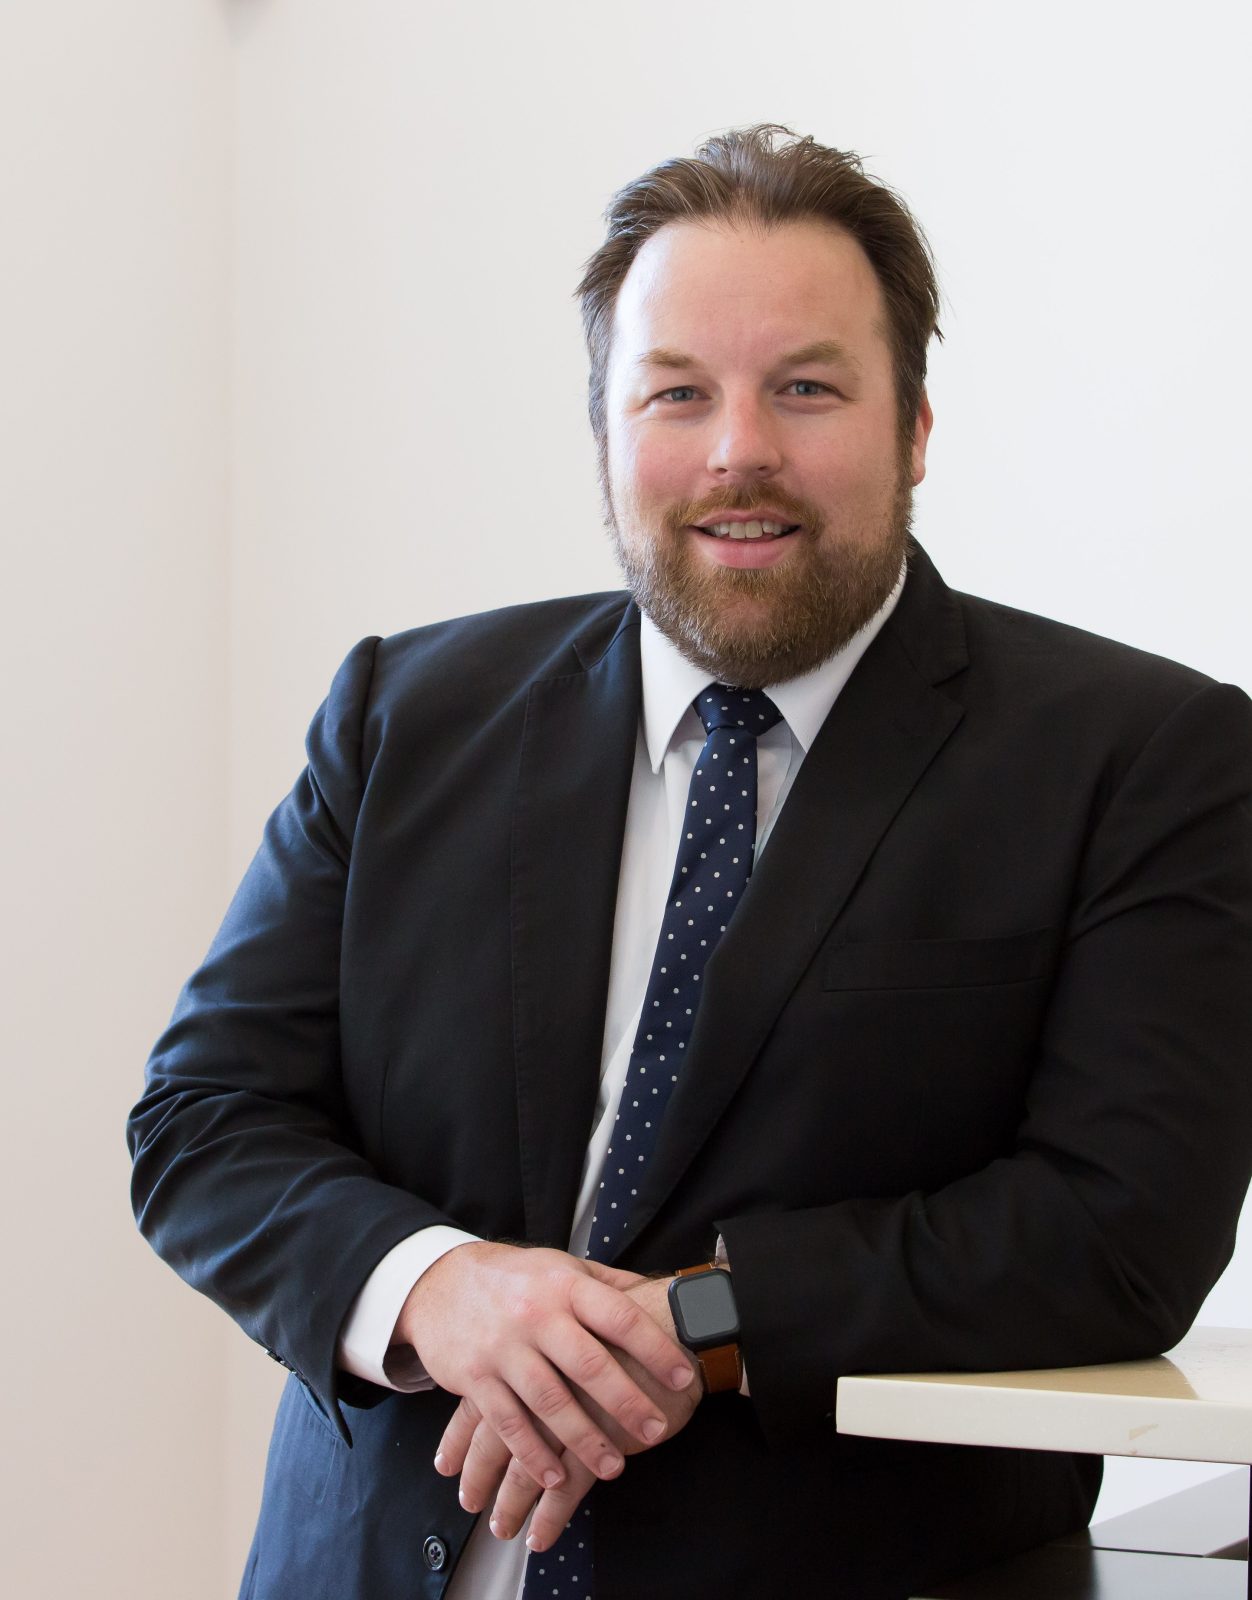 Mark Williams - Criminal Lawyer, Wills and Estates, and Traffic Lawyer in Adelaide.